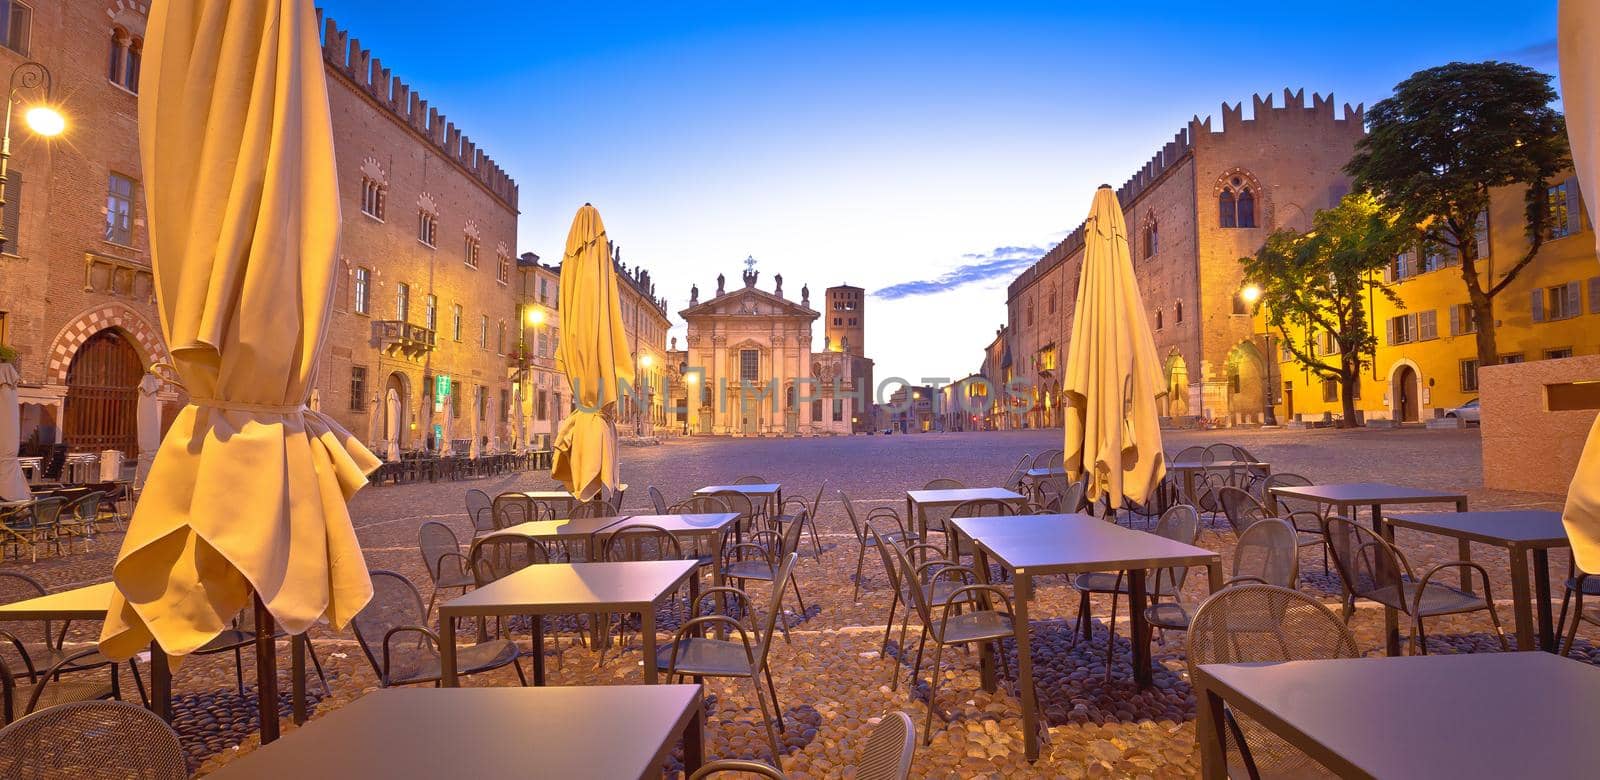 Mantova city Piazza Sordello cafe and architecture dawn view, European capital of culture and UNESCO world heritage site, Lombardy region of Italy
